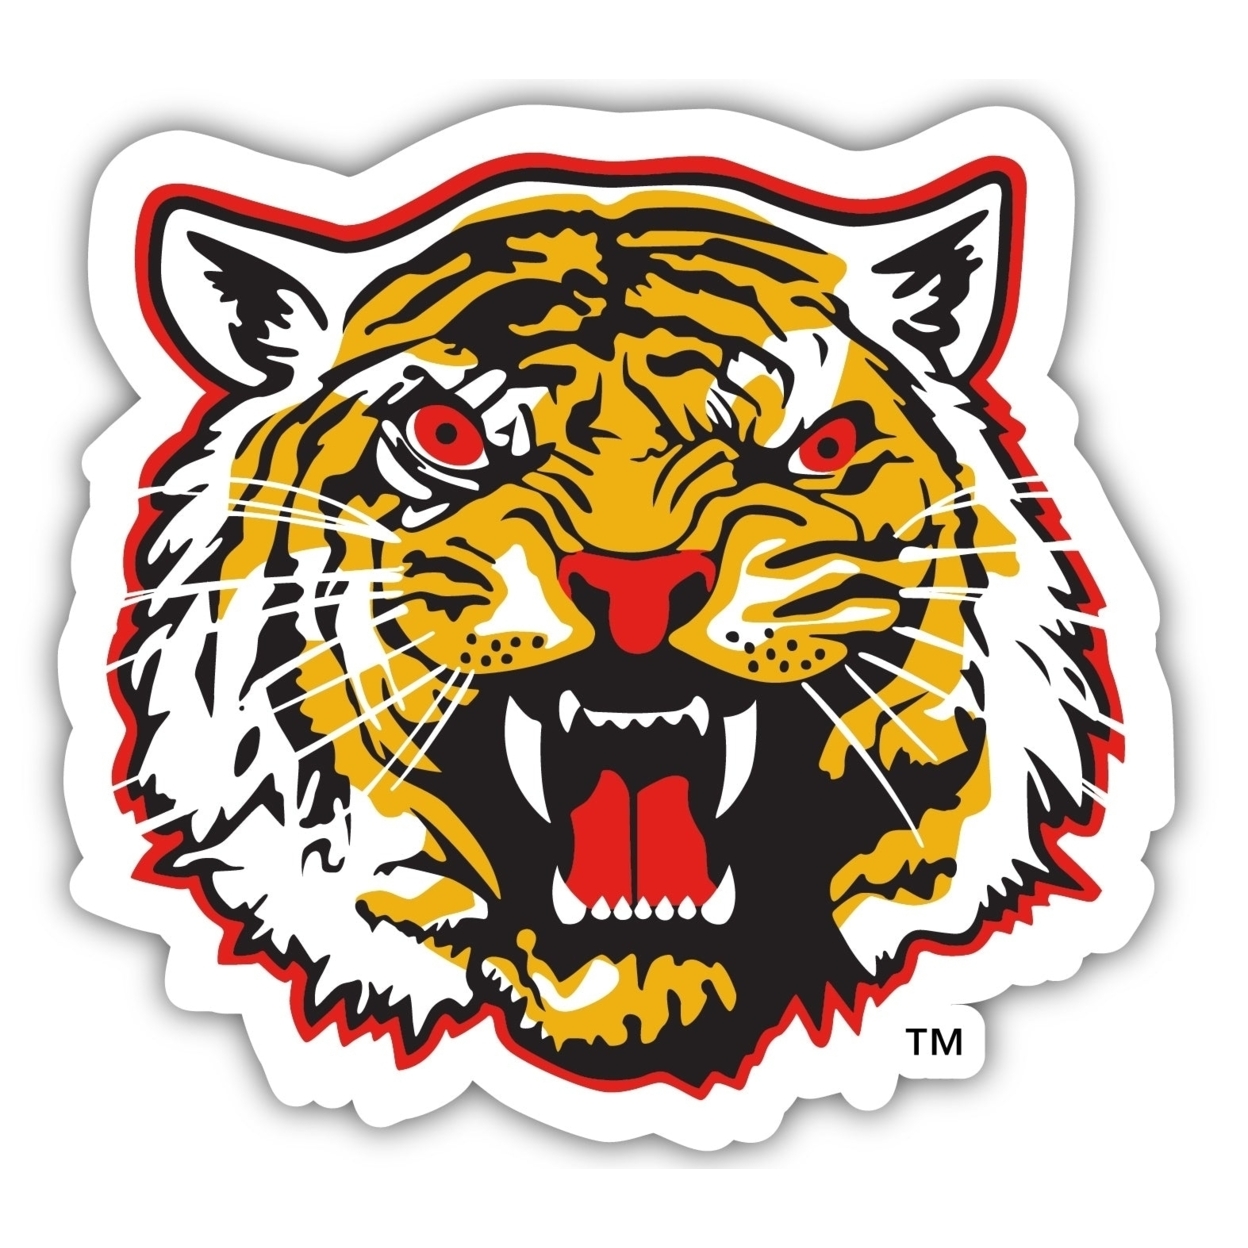 Grambling State Tigers 12 Inch Vinyl Decal Sticker